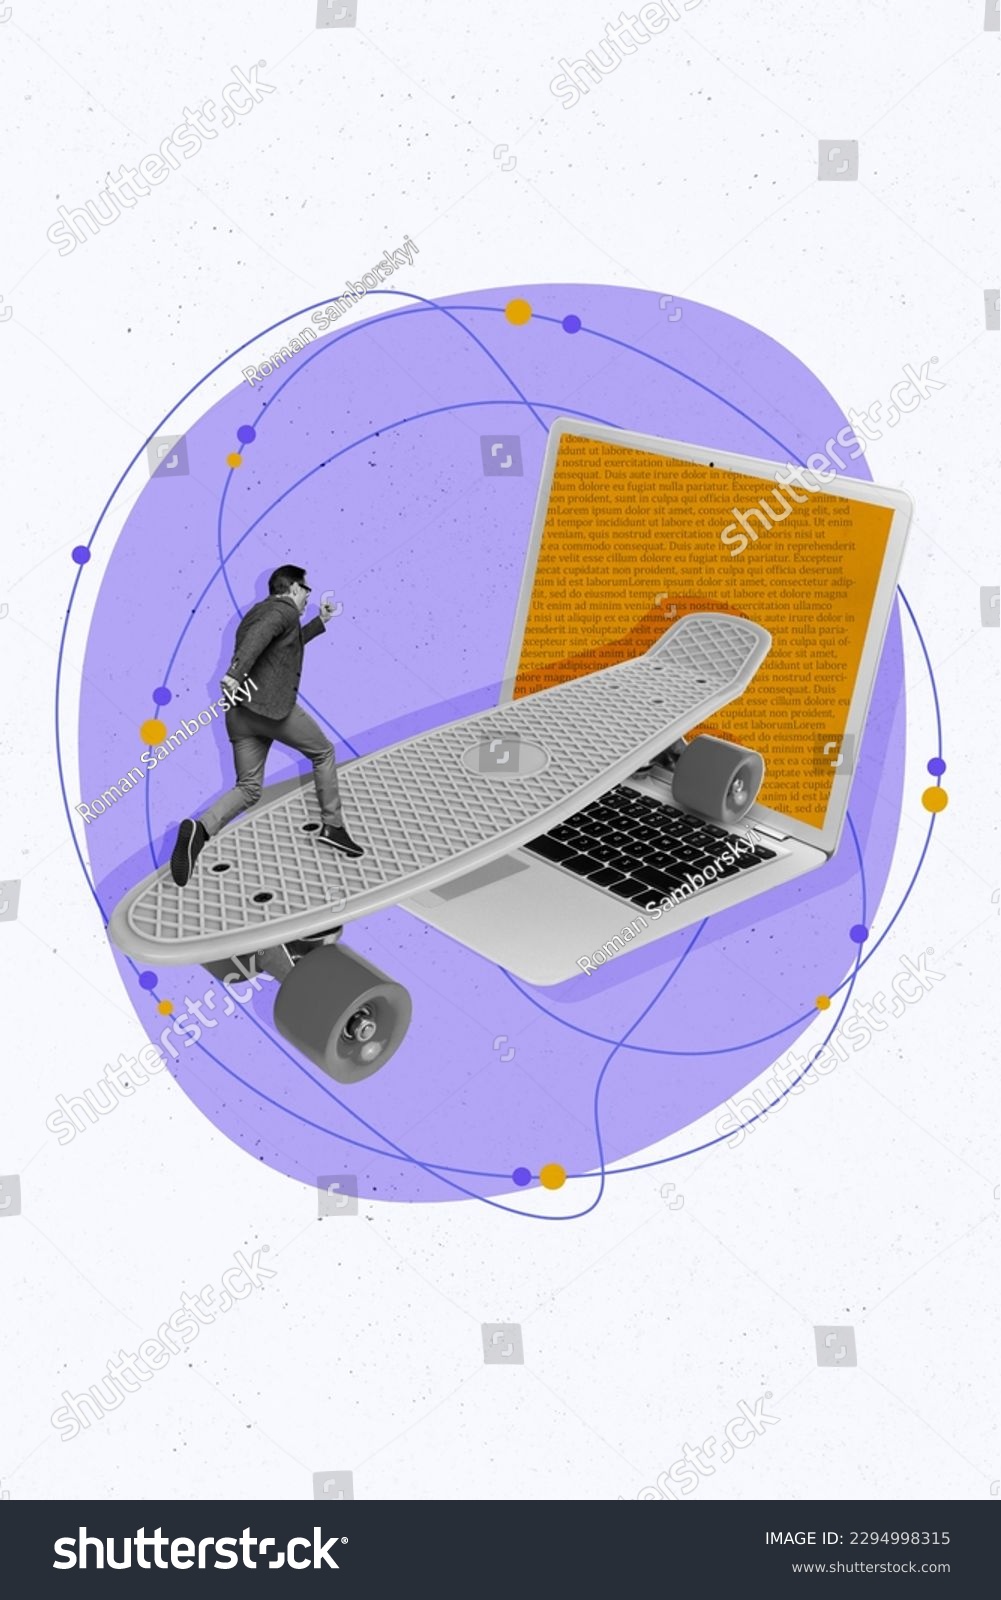 Artwork sketch collage photo of running man riding skateboard inside laptop screen browsing internet news isolated on purple background #2294998315